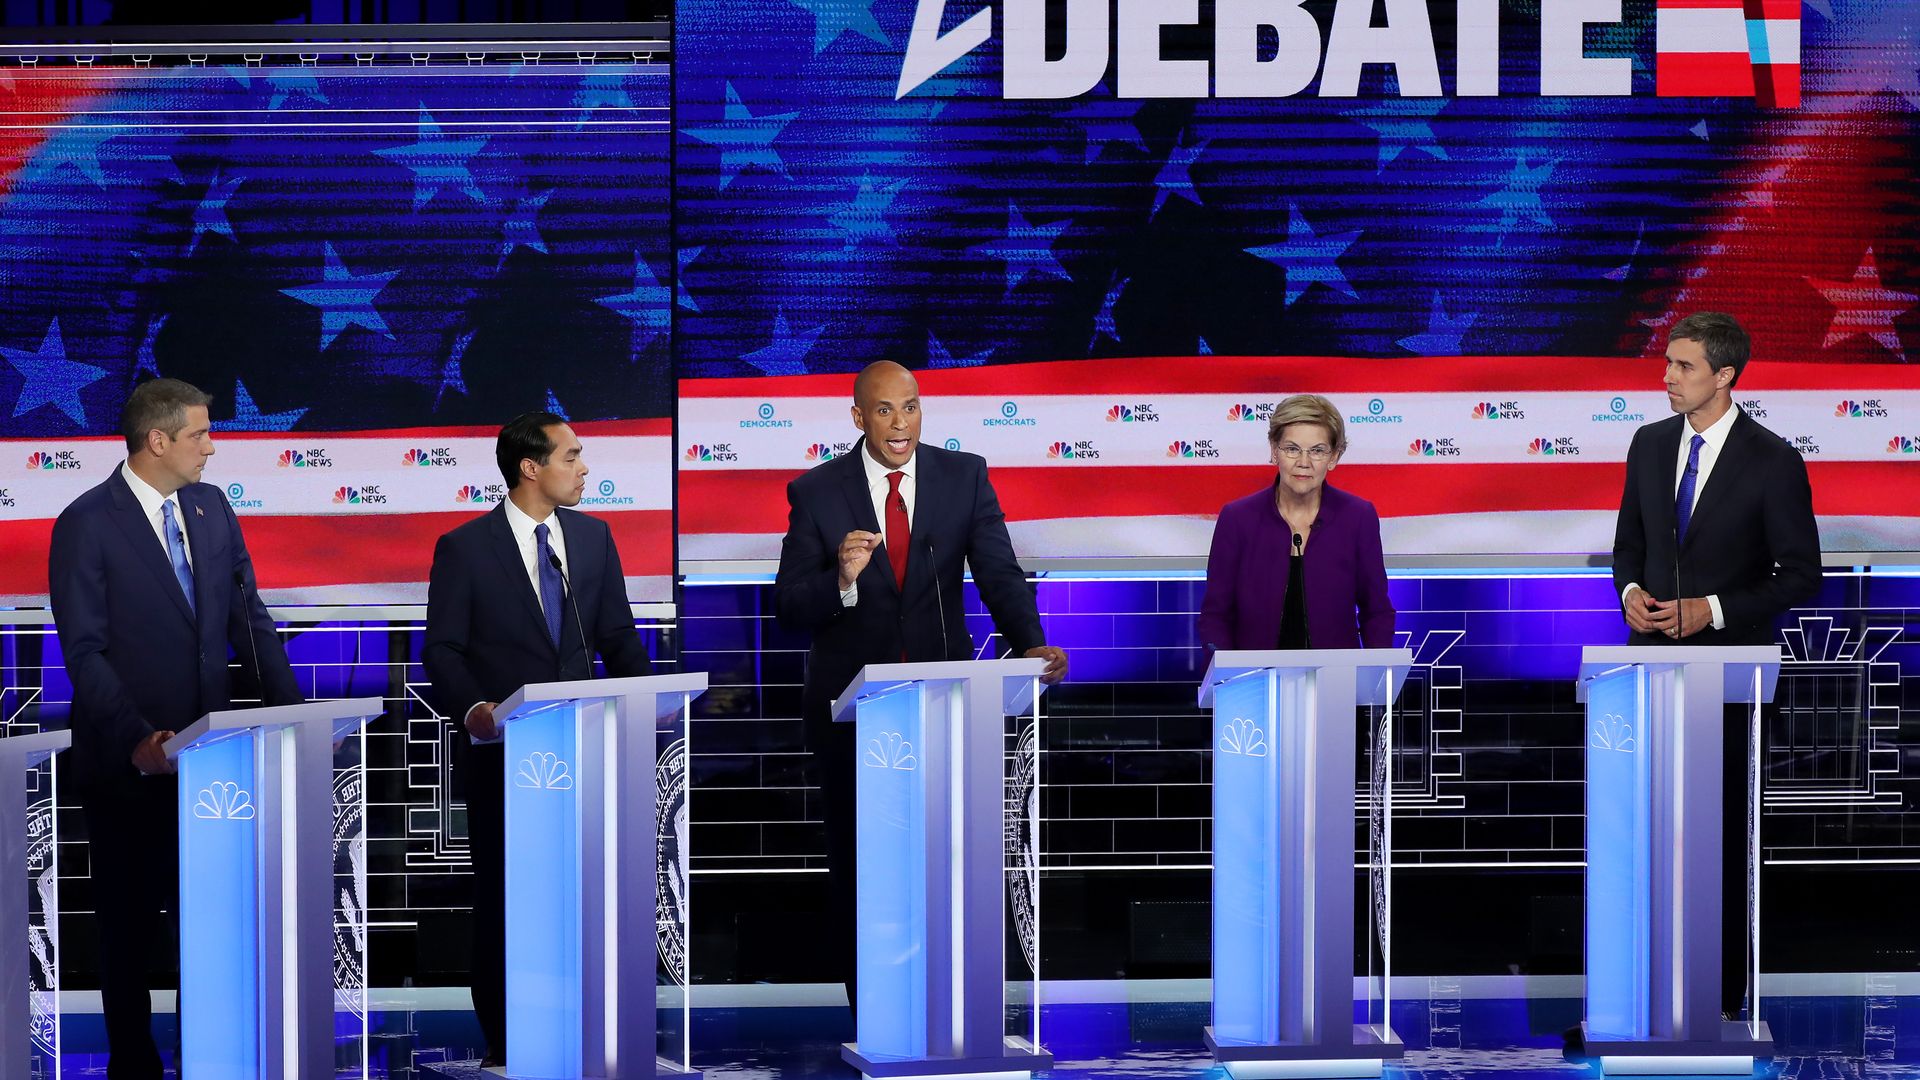 The debate stage with candidates at their podiums. 